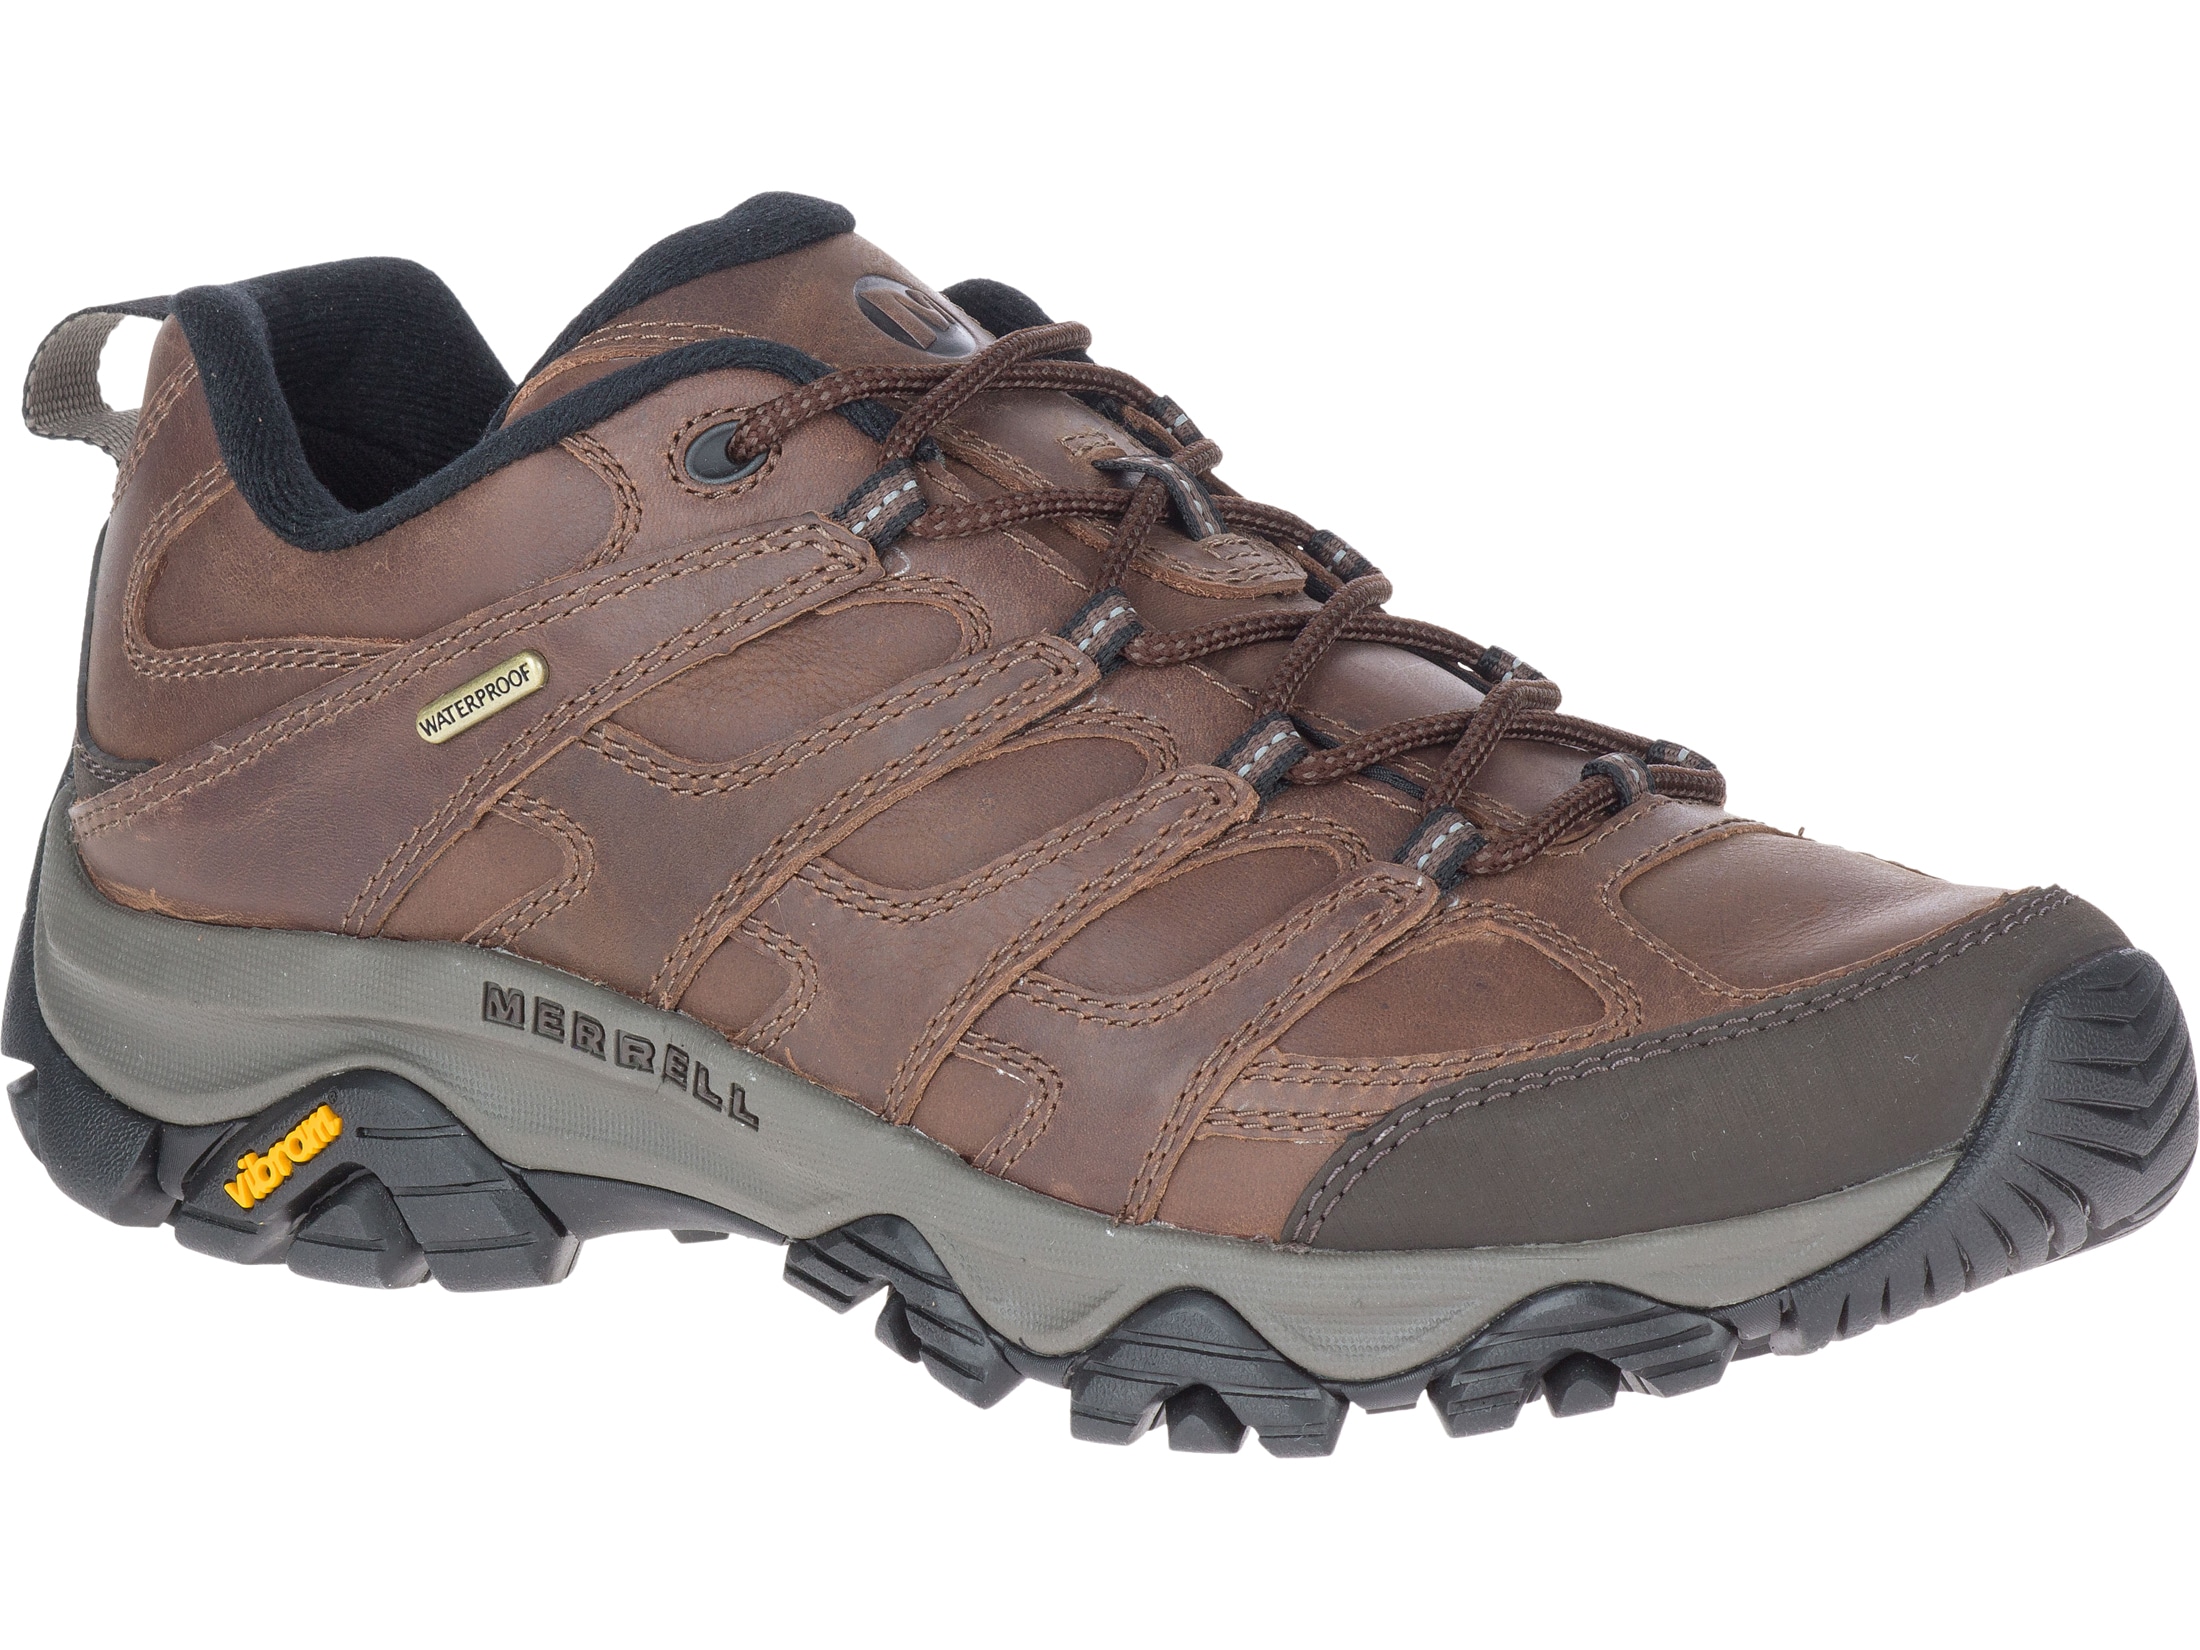 Merrell Moab 3 Prime Waterproof Hiking Boots Leather Mist Mens 95 D